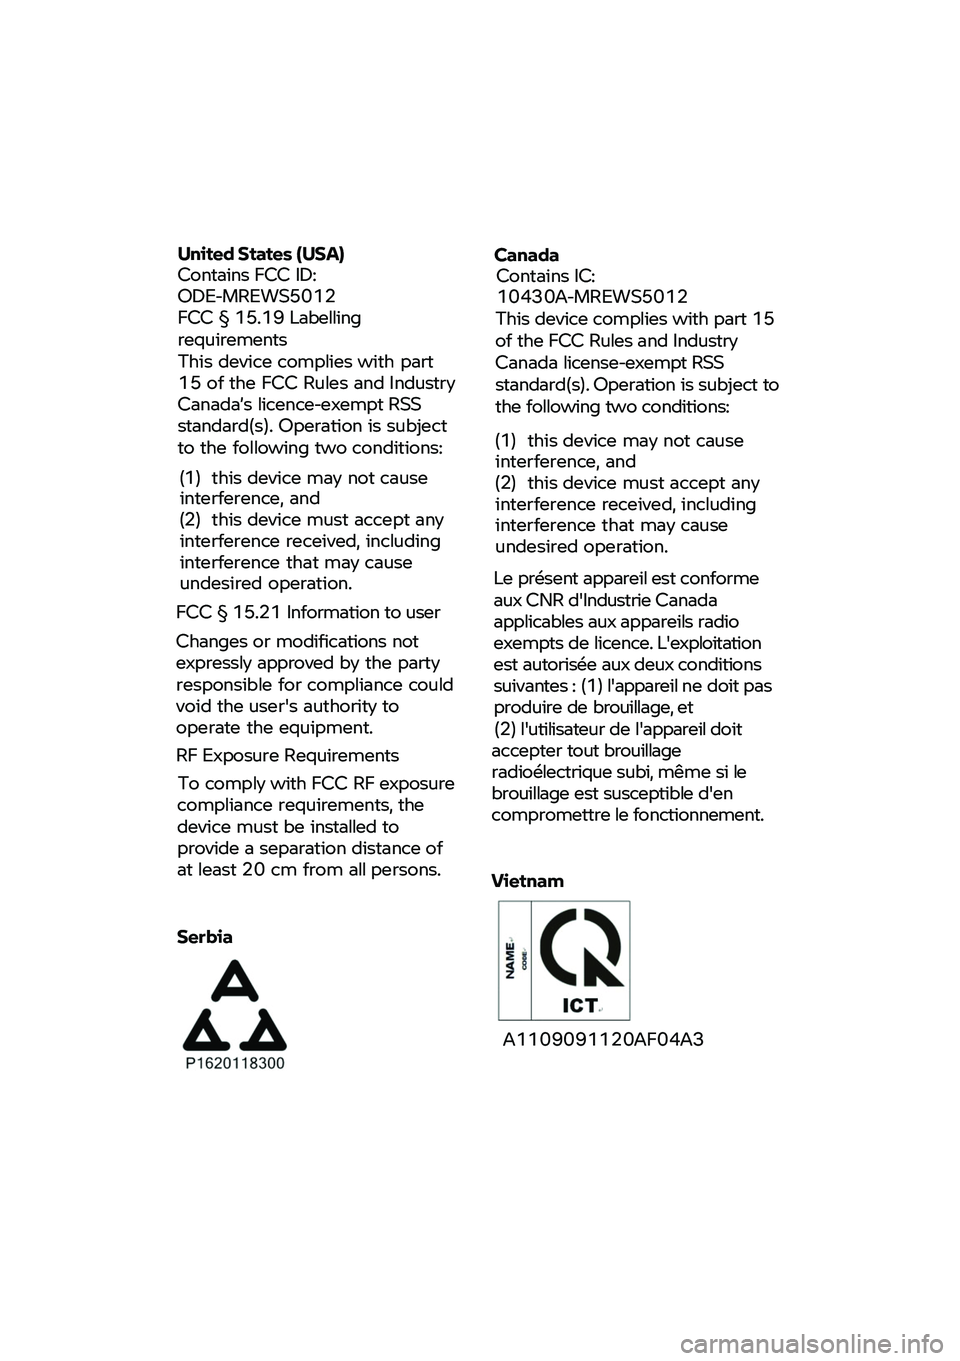 BMW MOTORRAD CE 04 2021  Riders Manual (in English)  
 
 
 
United States (USA) Contains FCC ID: ODE-MREWS5012 FCC § 15.19 Labelling requirements This device complies with part 15 of the FCC Rules and Industry Canada’s licence-exempt RSS standard(s)